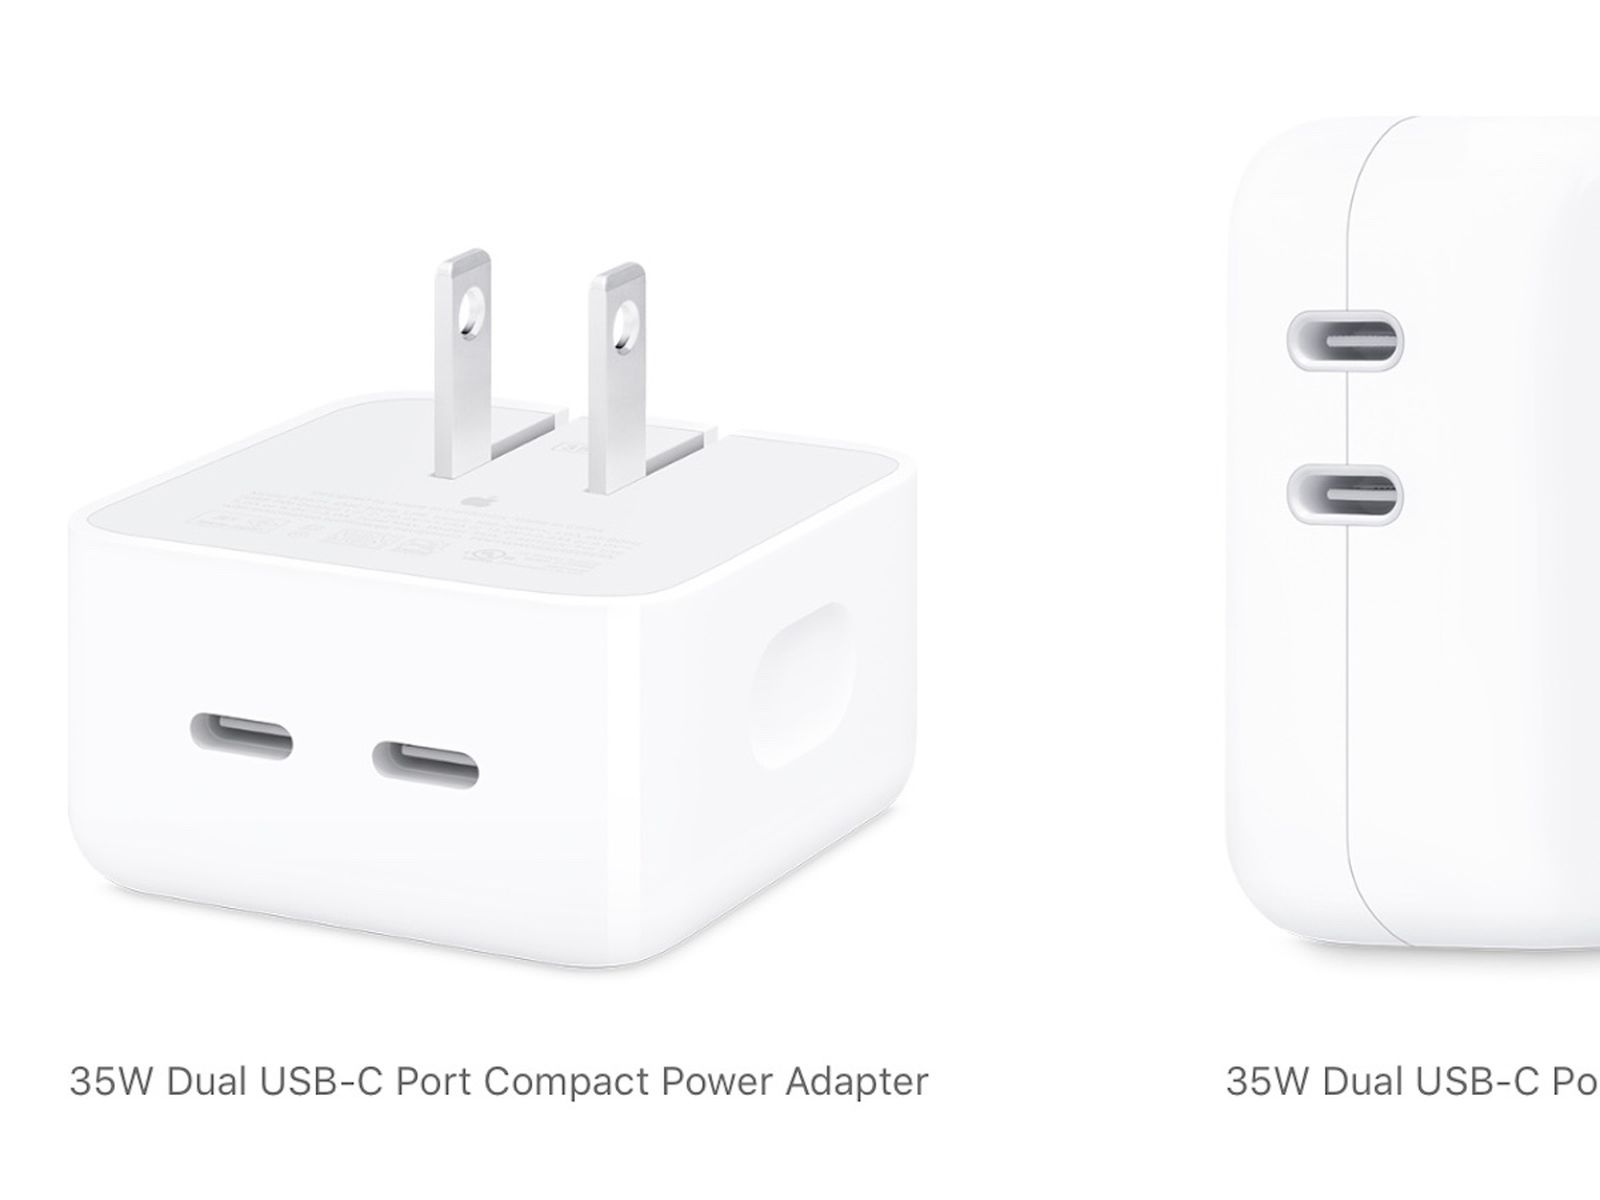 Apple hints at its first dual-port USB-C power adapter